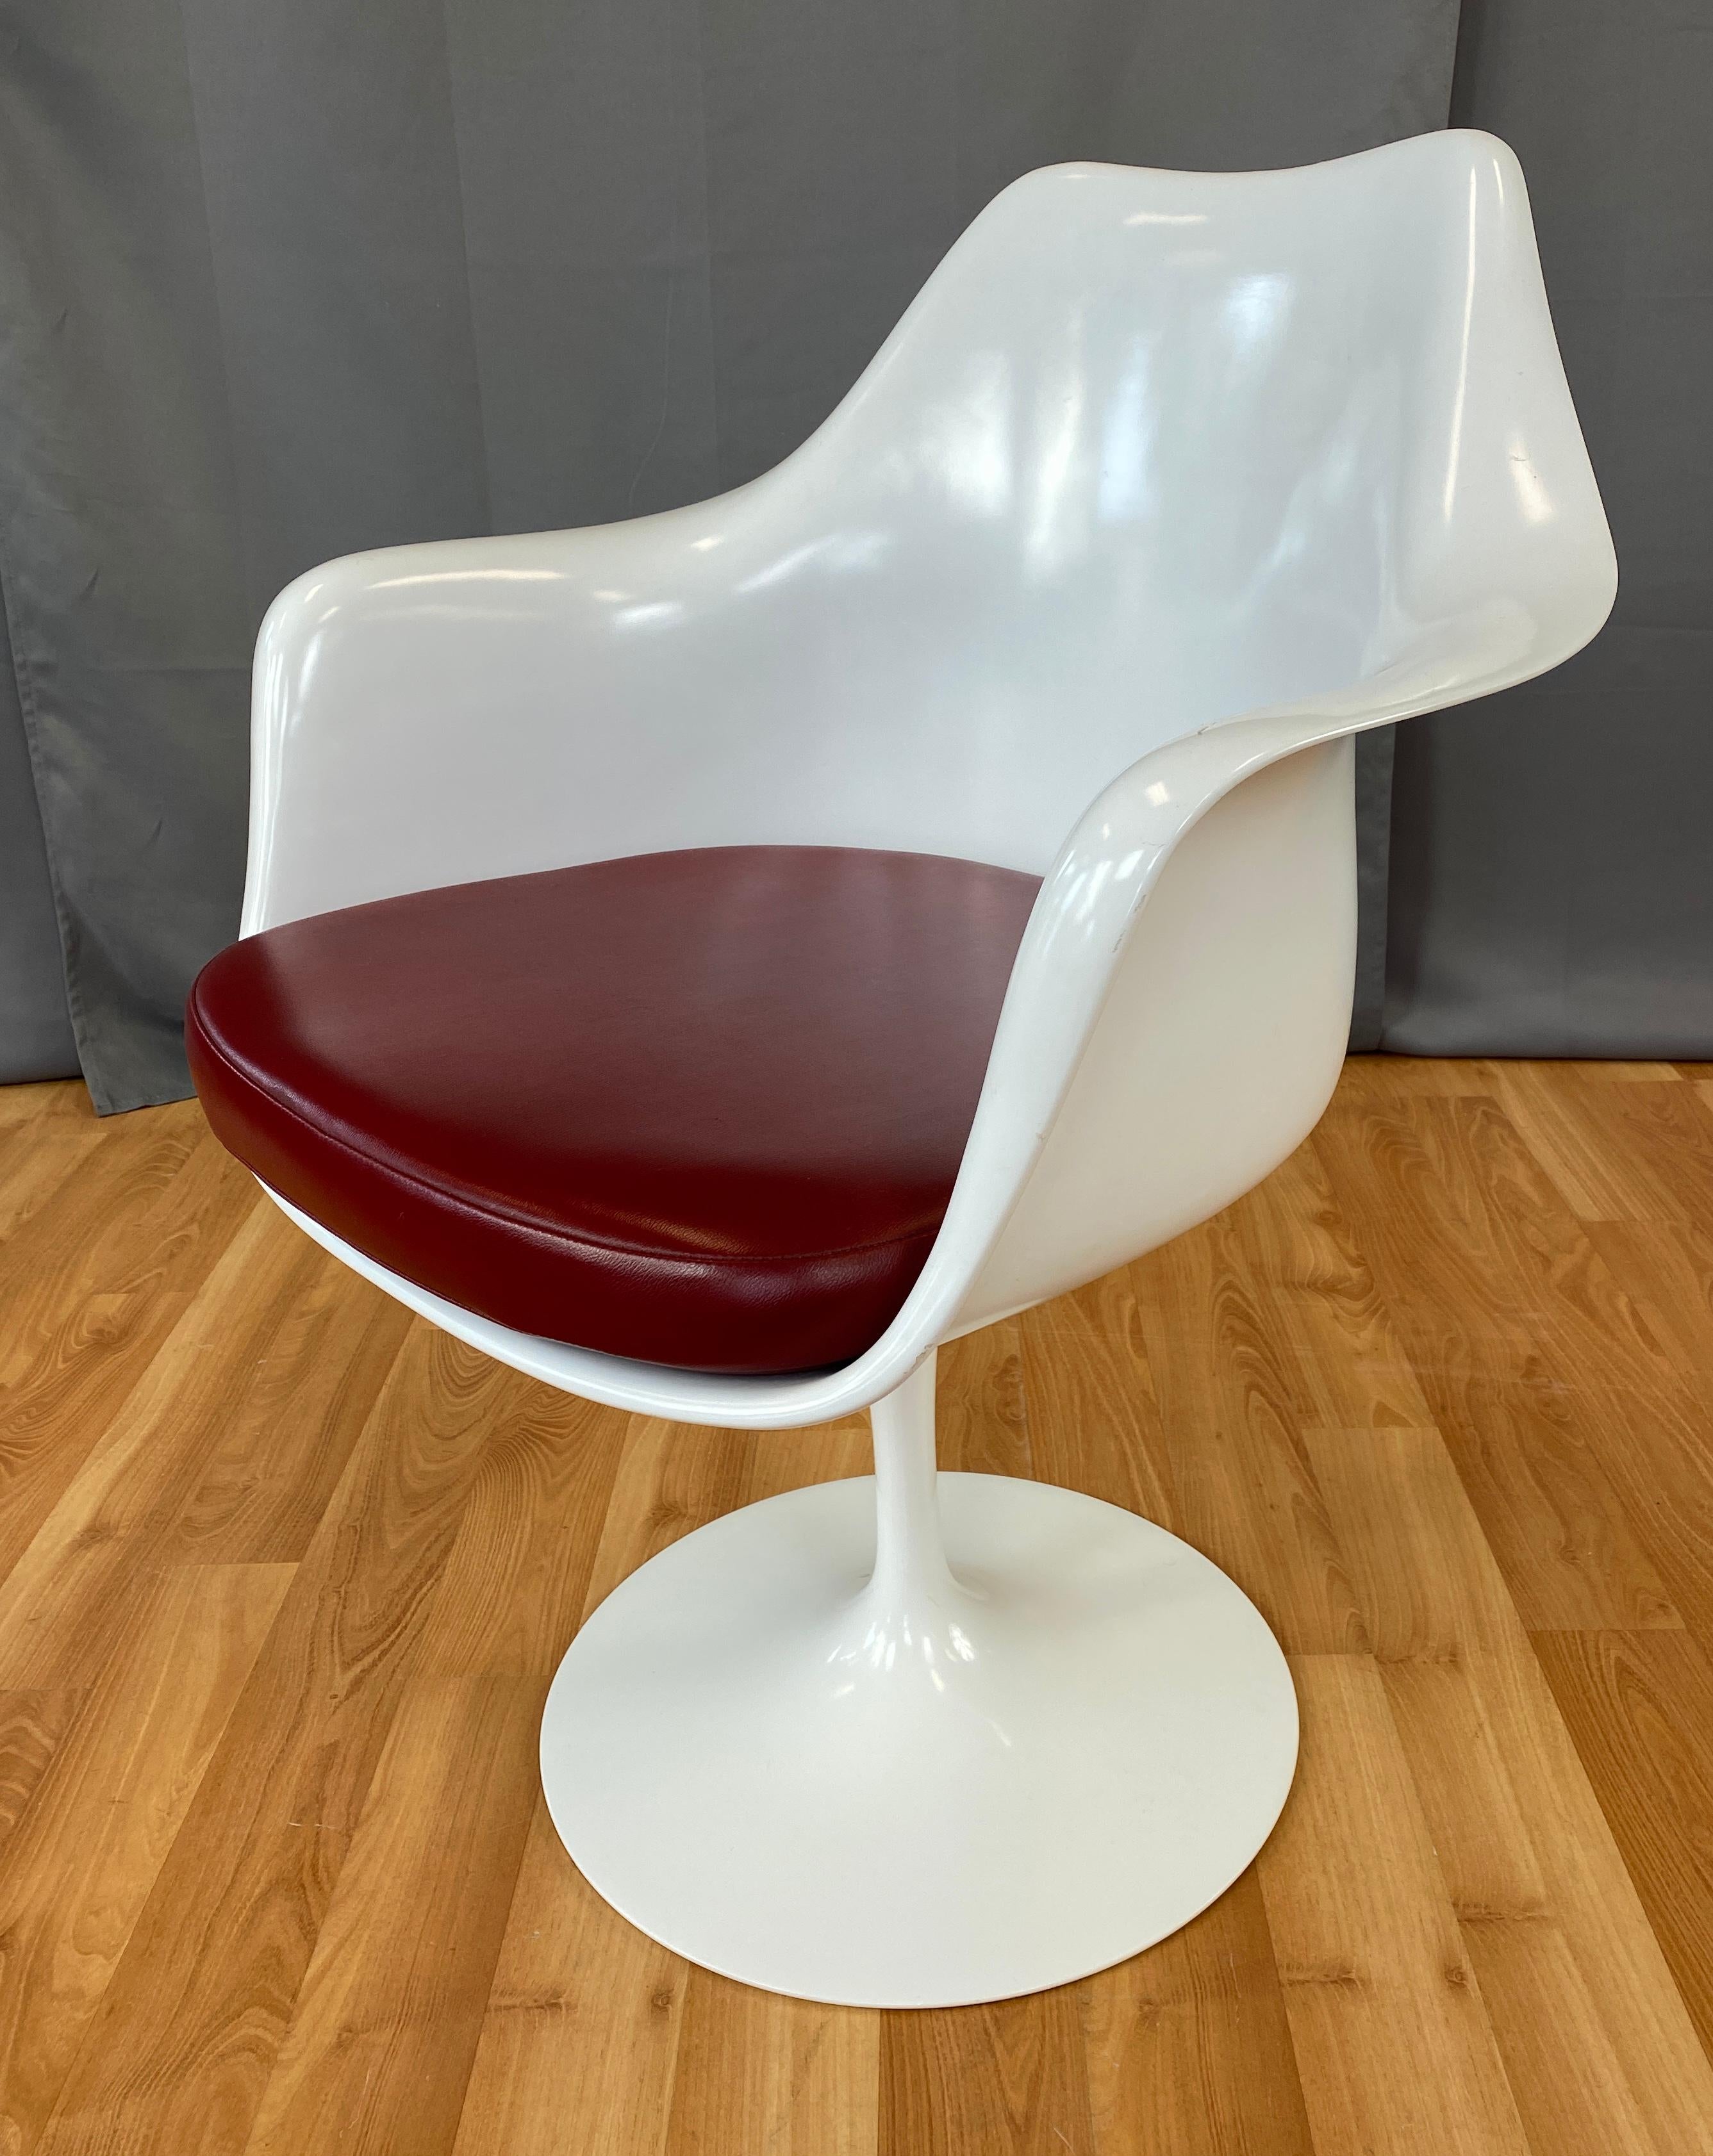 Offered here is a white tulip armchair designed by Eero Saarinen and made by Knoll.
All white chair, with Ox Blood leather upholstery, on Knoll's web site we think it's Yolo Leather Garnet.
 